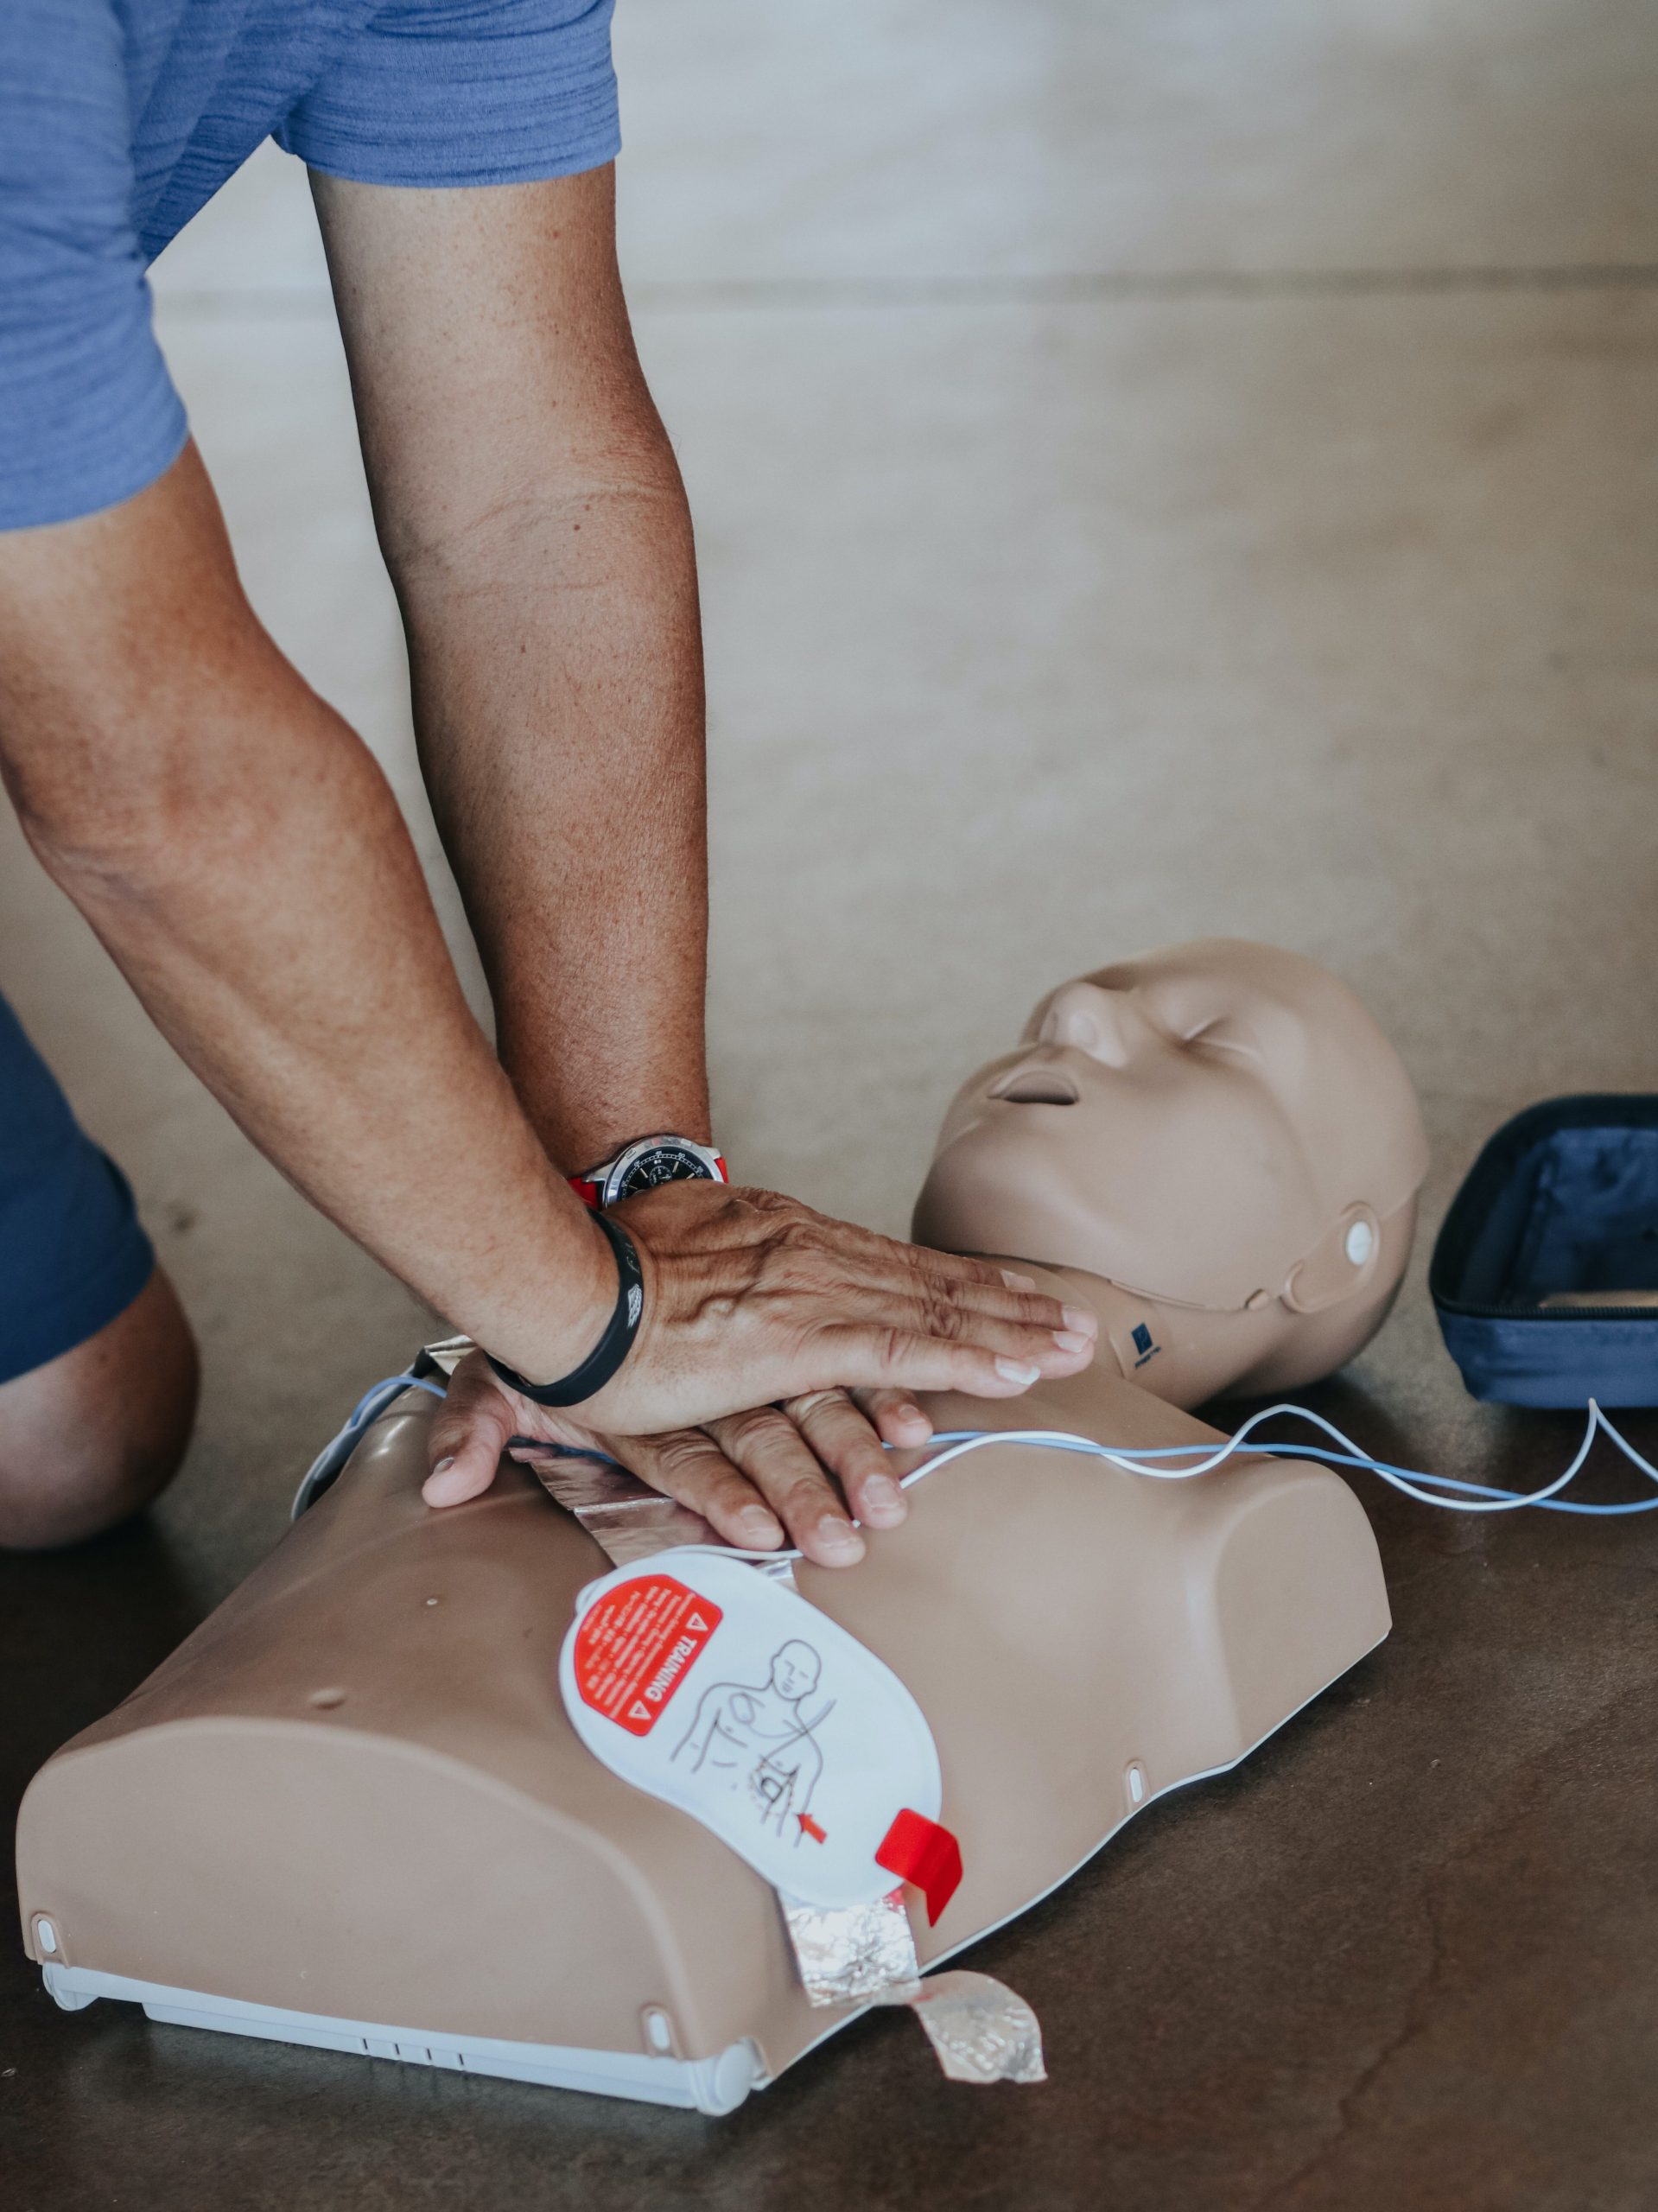 Man performing CPR on training dummy